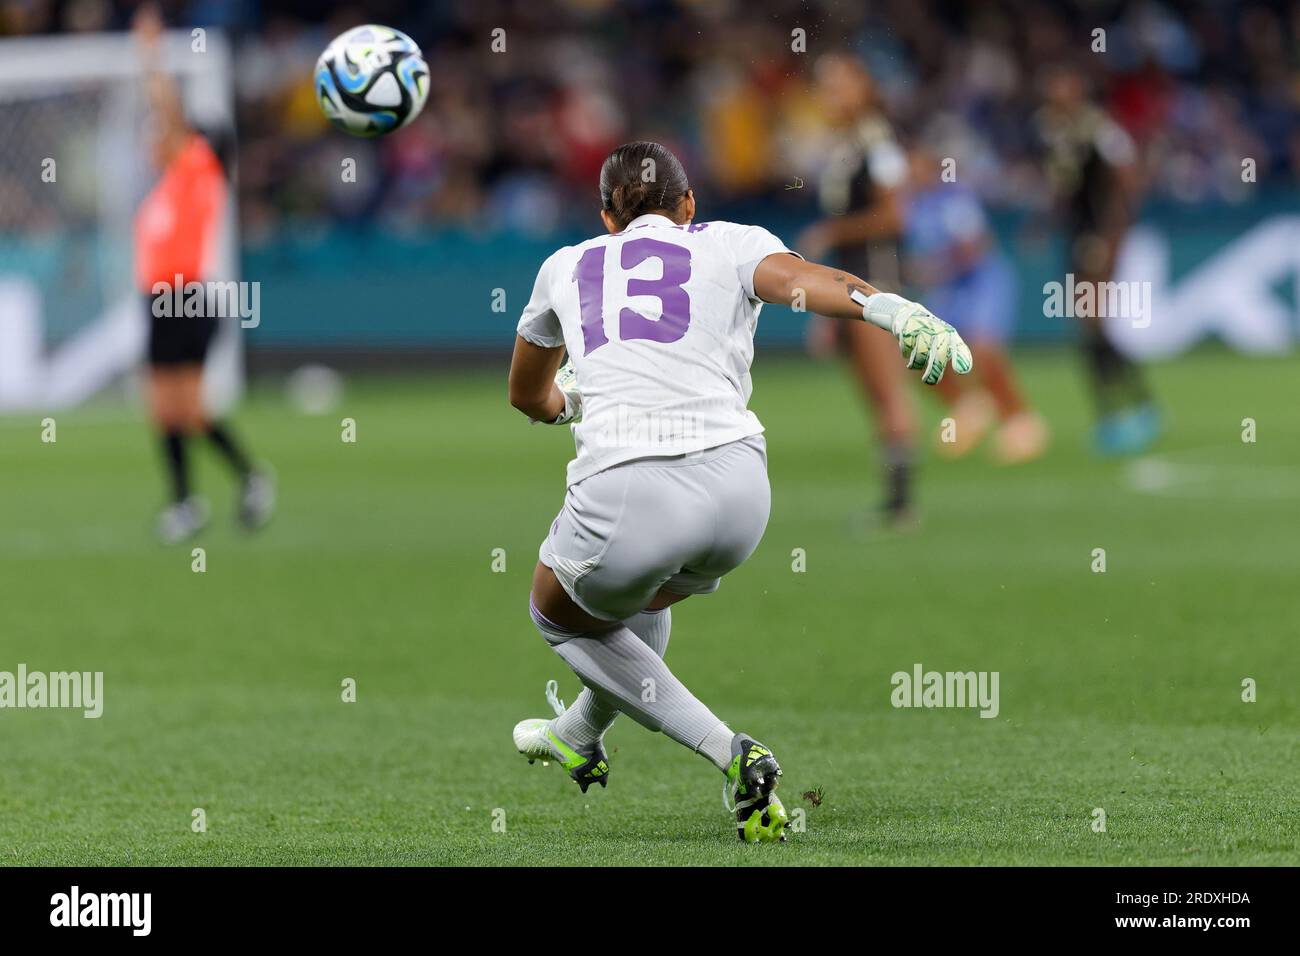 Sydney, Australia. 23rd July, 2023. Goal keeper, Rebecca Spencer of Jamaica strikes the ball during the FIFA Women's World Cup 2023 between France and Jamaica at Sydney Football Stadium on July 23, 2023 in Sydney, Australia Credit: IOIO IMAGES/Alamy Live News Stock Photo